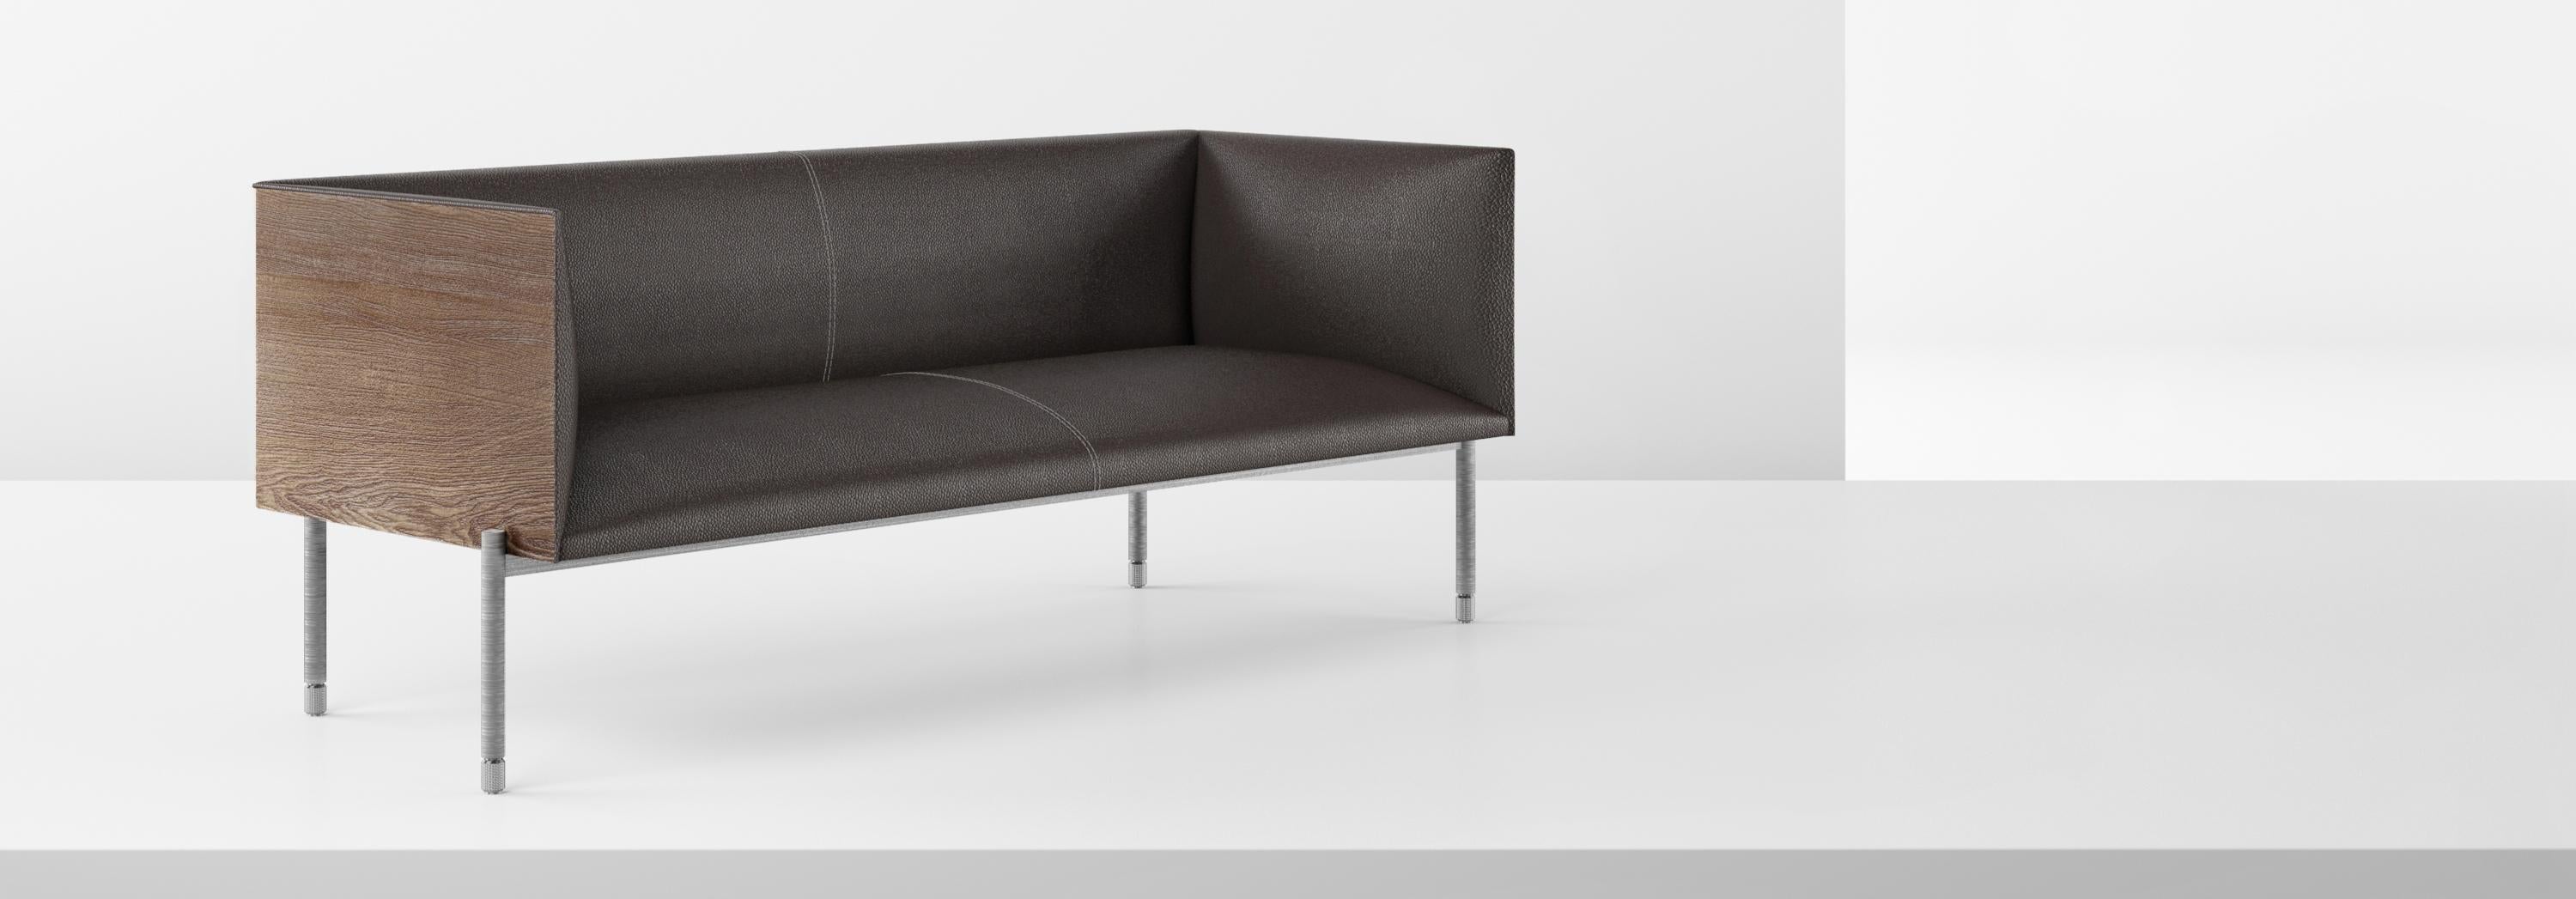 Shift is a series of products that owe their name to the metal leg system rotating around the product to provide support and make it float effortlessly. The seating unit is constructed with a sturdy wooden box that surround a curved leather